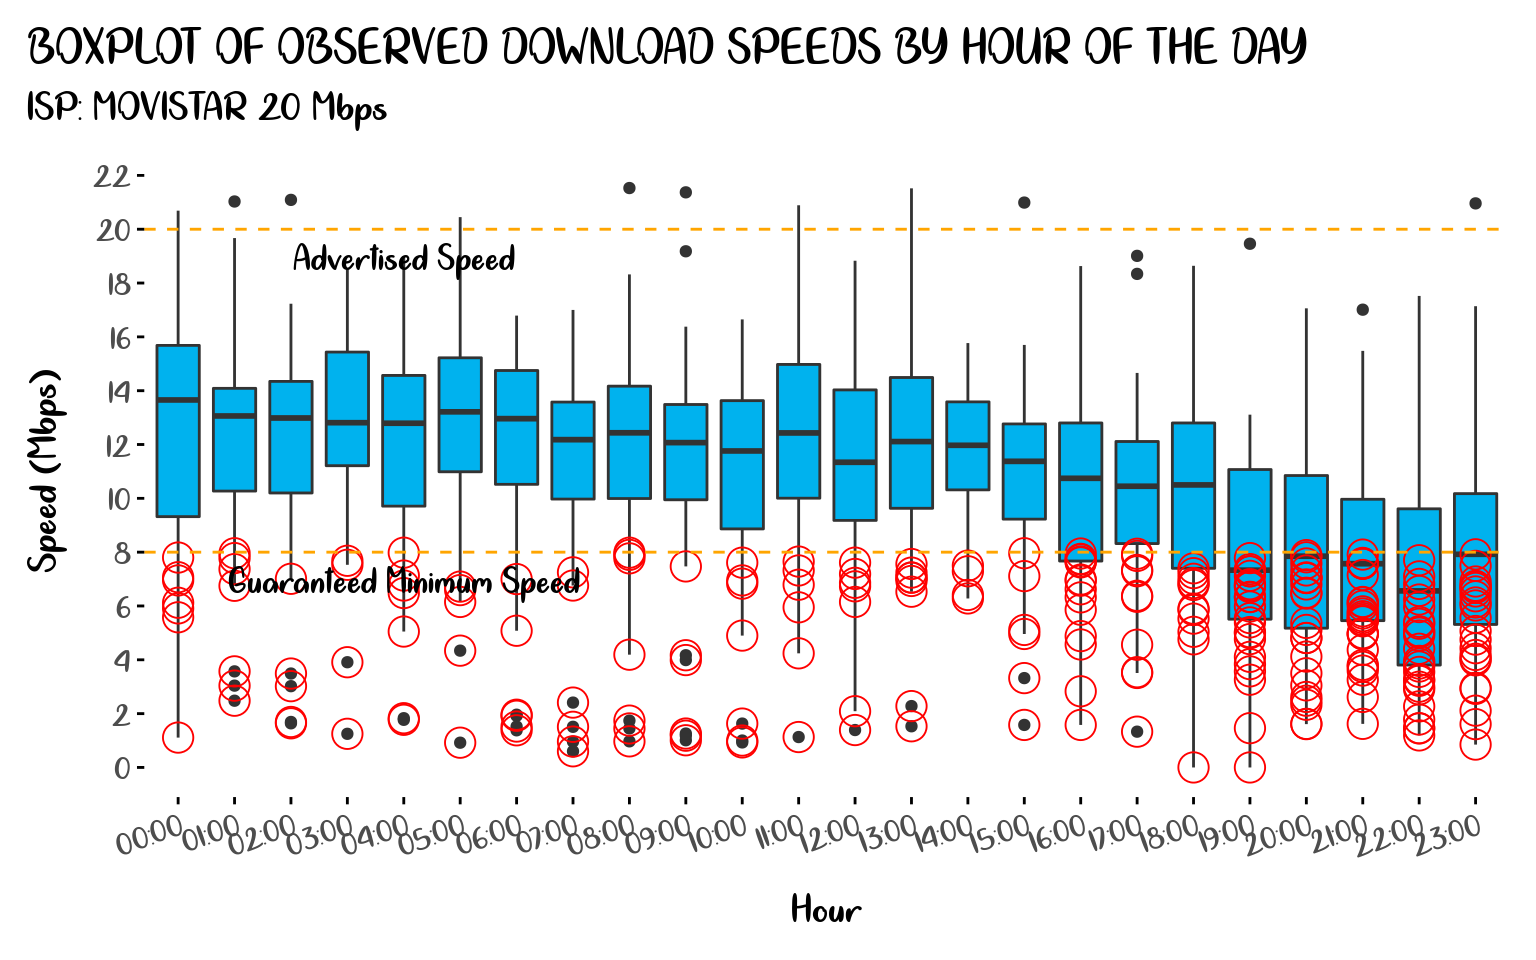 Boxplot of Observer Download Speeds by Hour of the Day